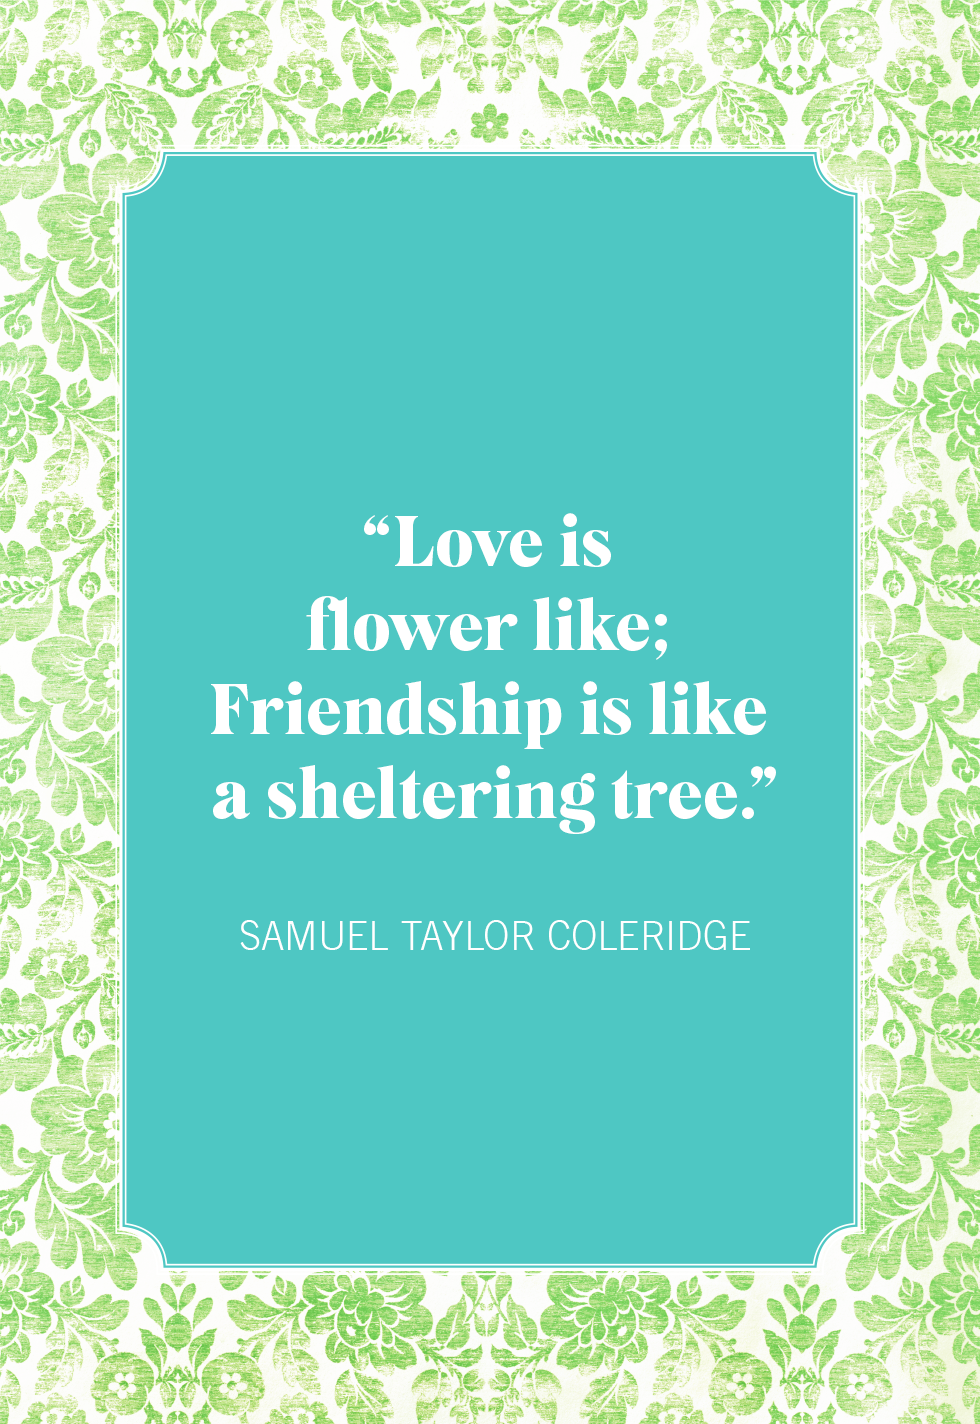 tree quotes about love